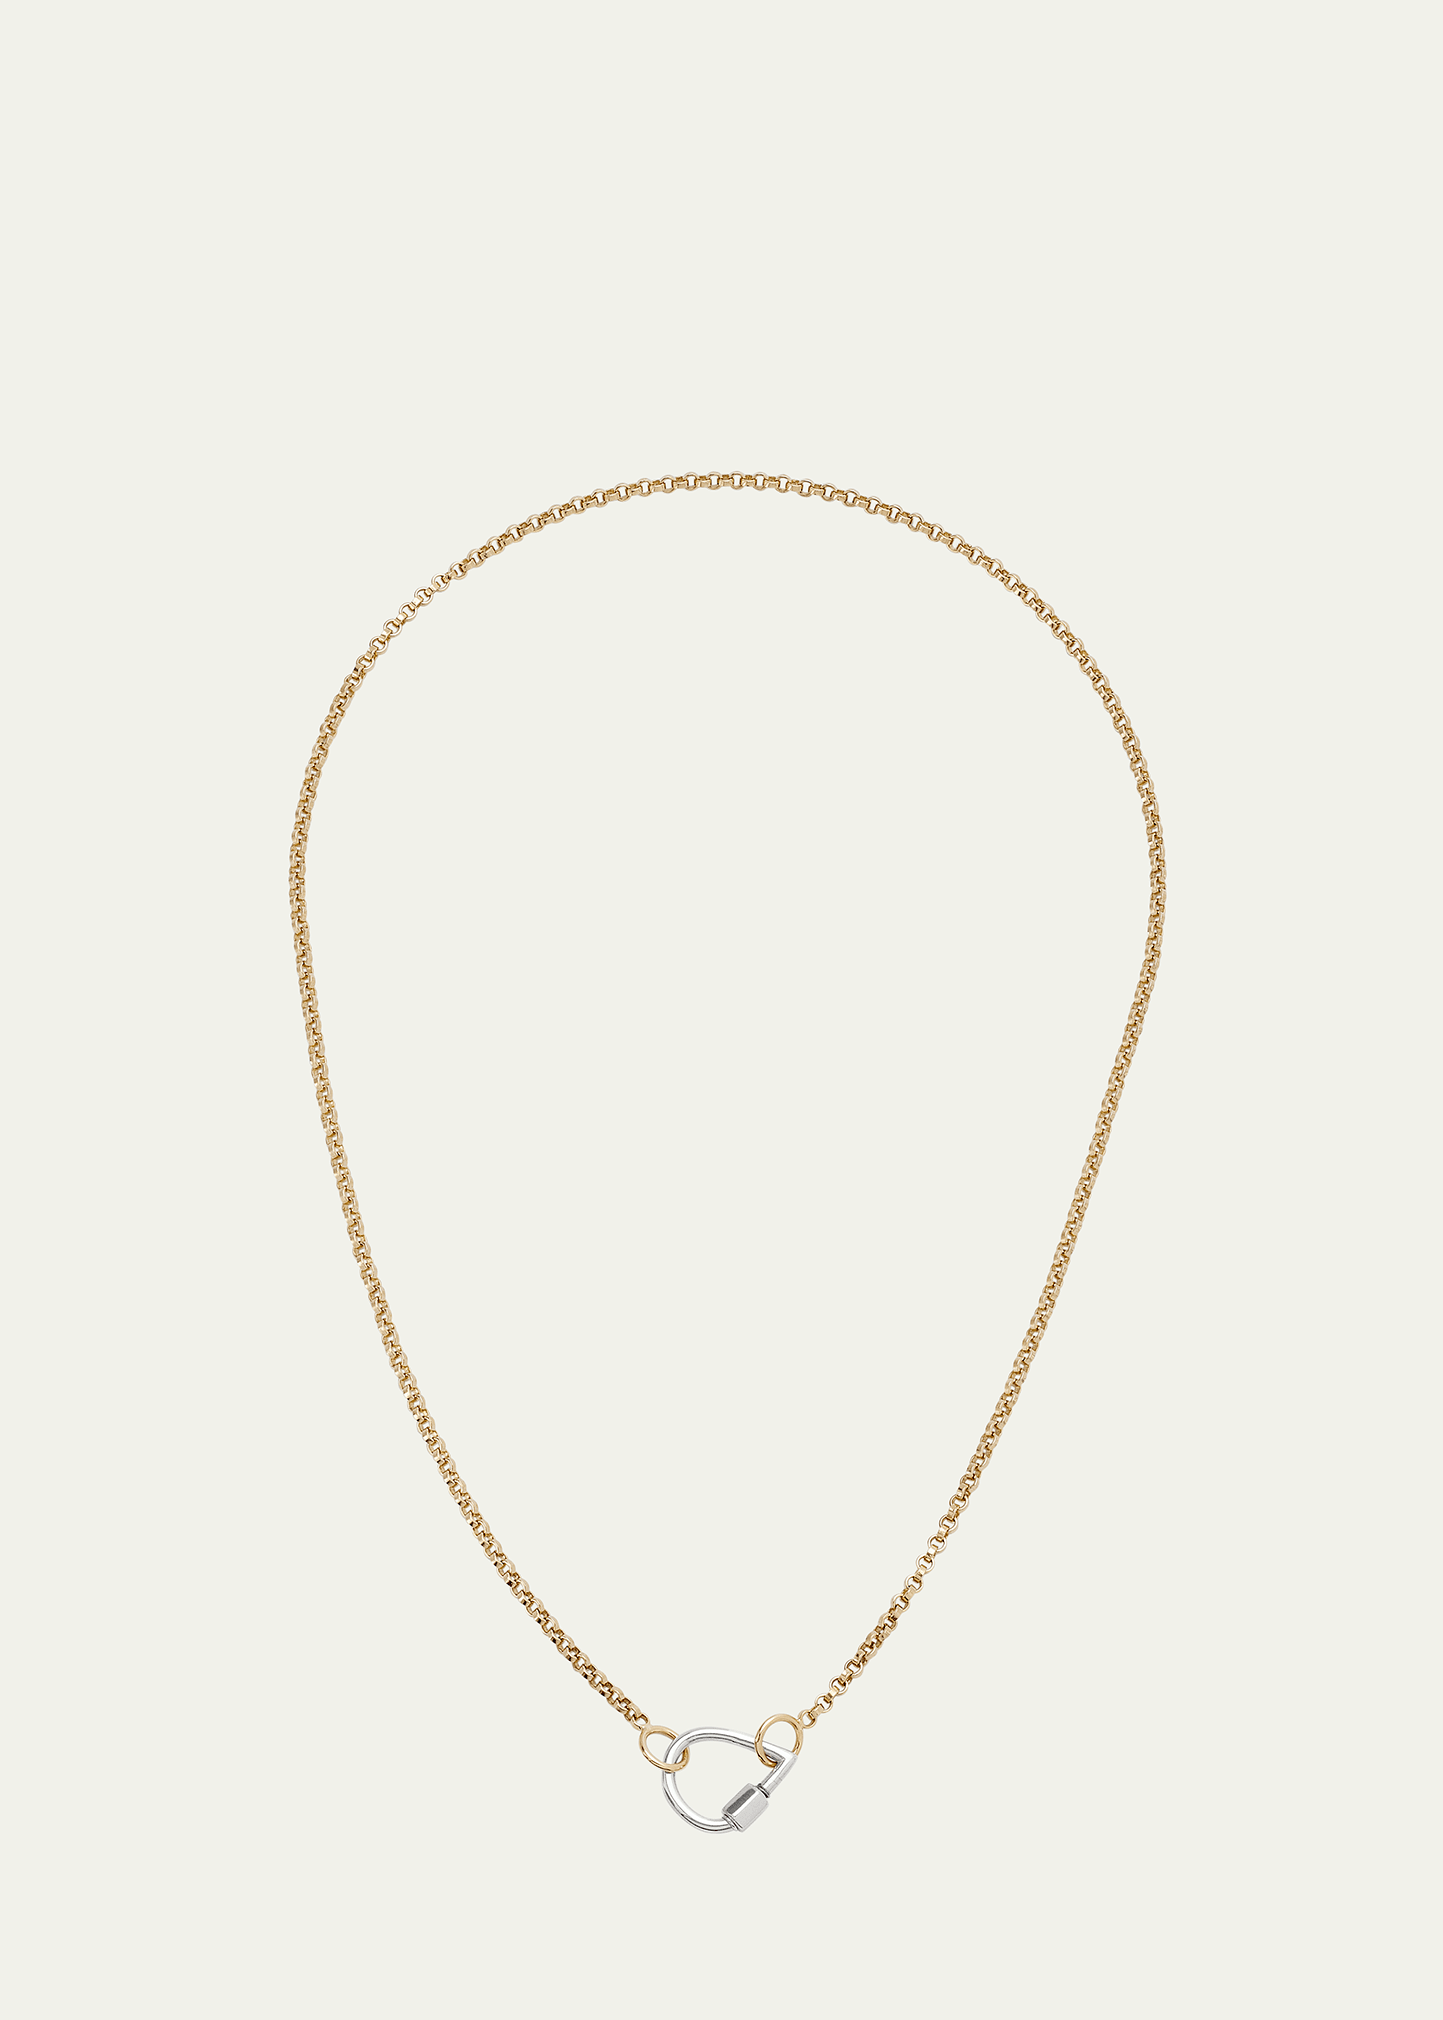 Marla Aaron 14k Yellow Gold Rolo Chain and Silver Lock Necklace